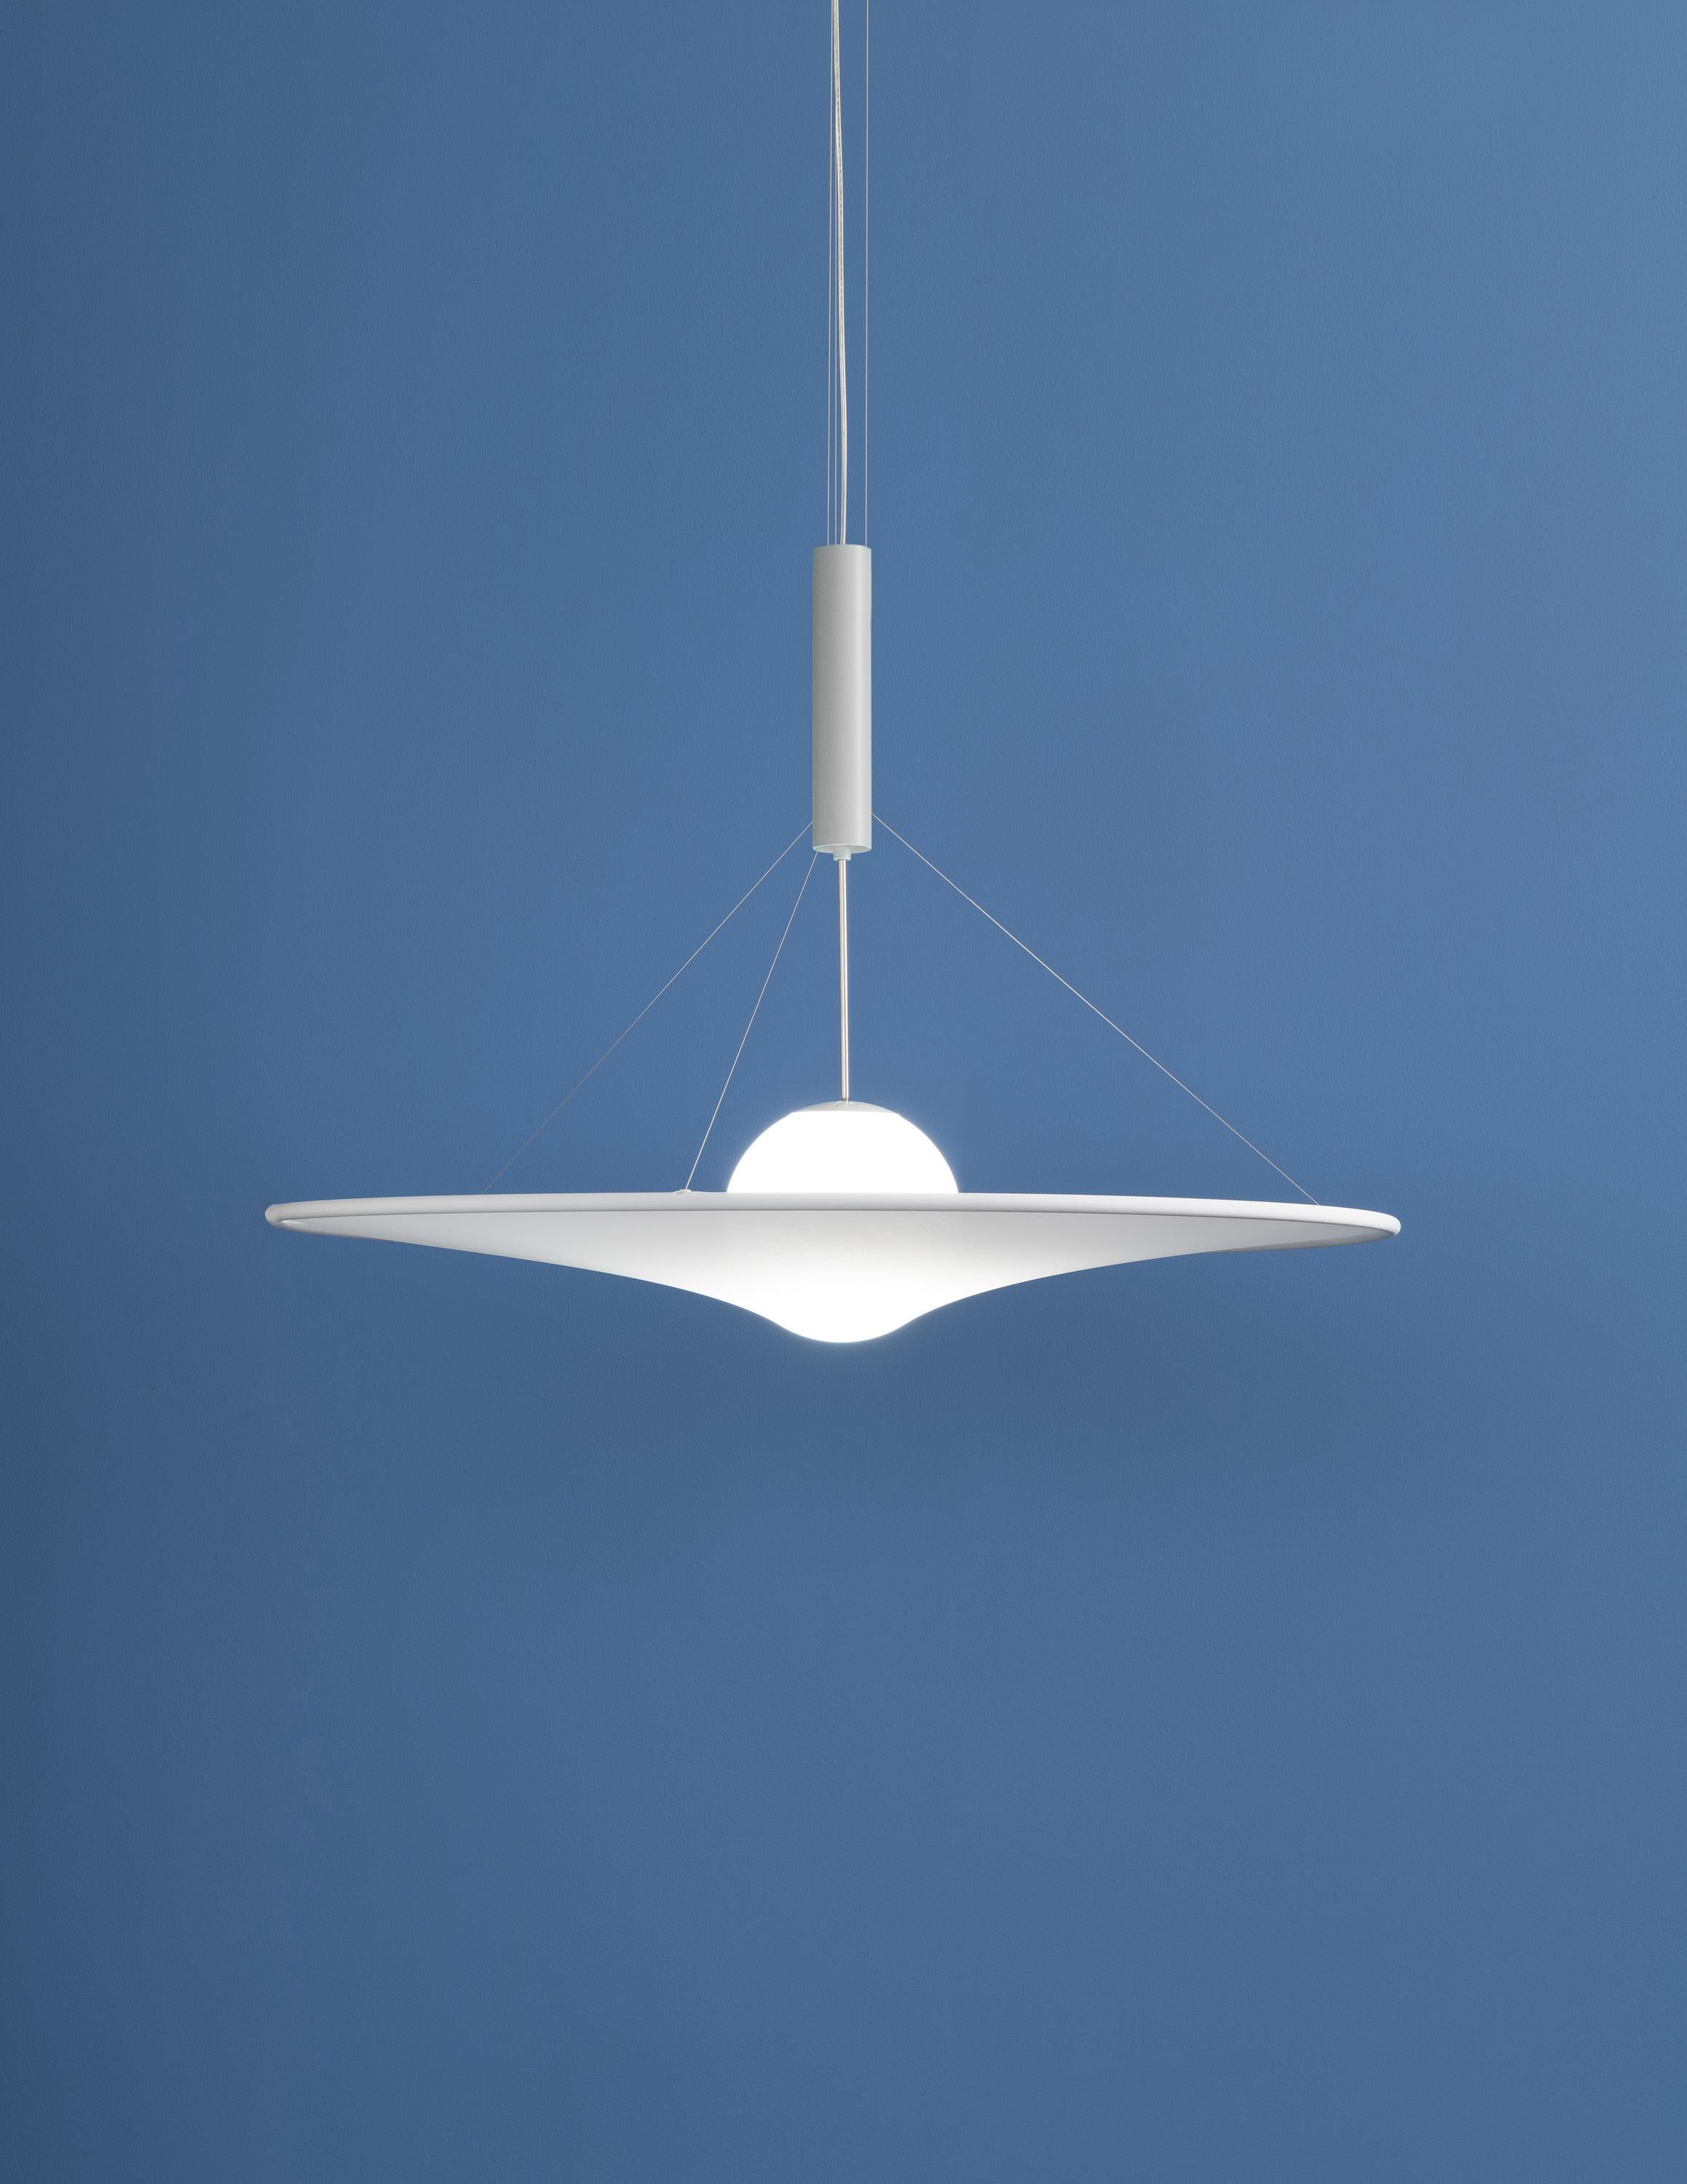 Axolight Manto Large Pendant Light in White Fabric and Grey Finish by Davide Besozzi

Manto expresses its true personality in the reciprocal movement of simple geometries. Thanks to its artisan knowledge and dynamic nature, it changes shape and